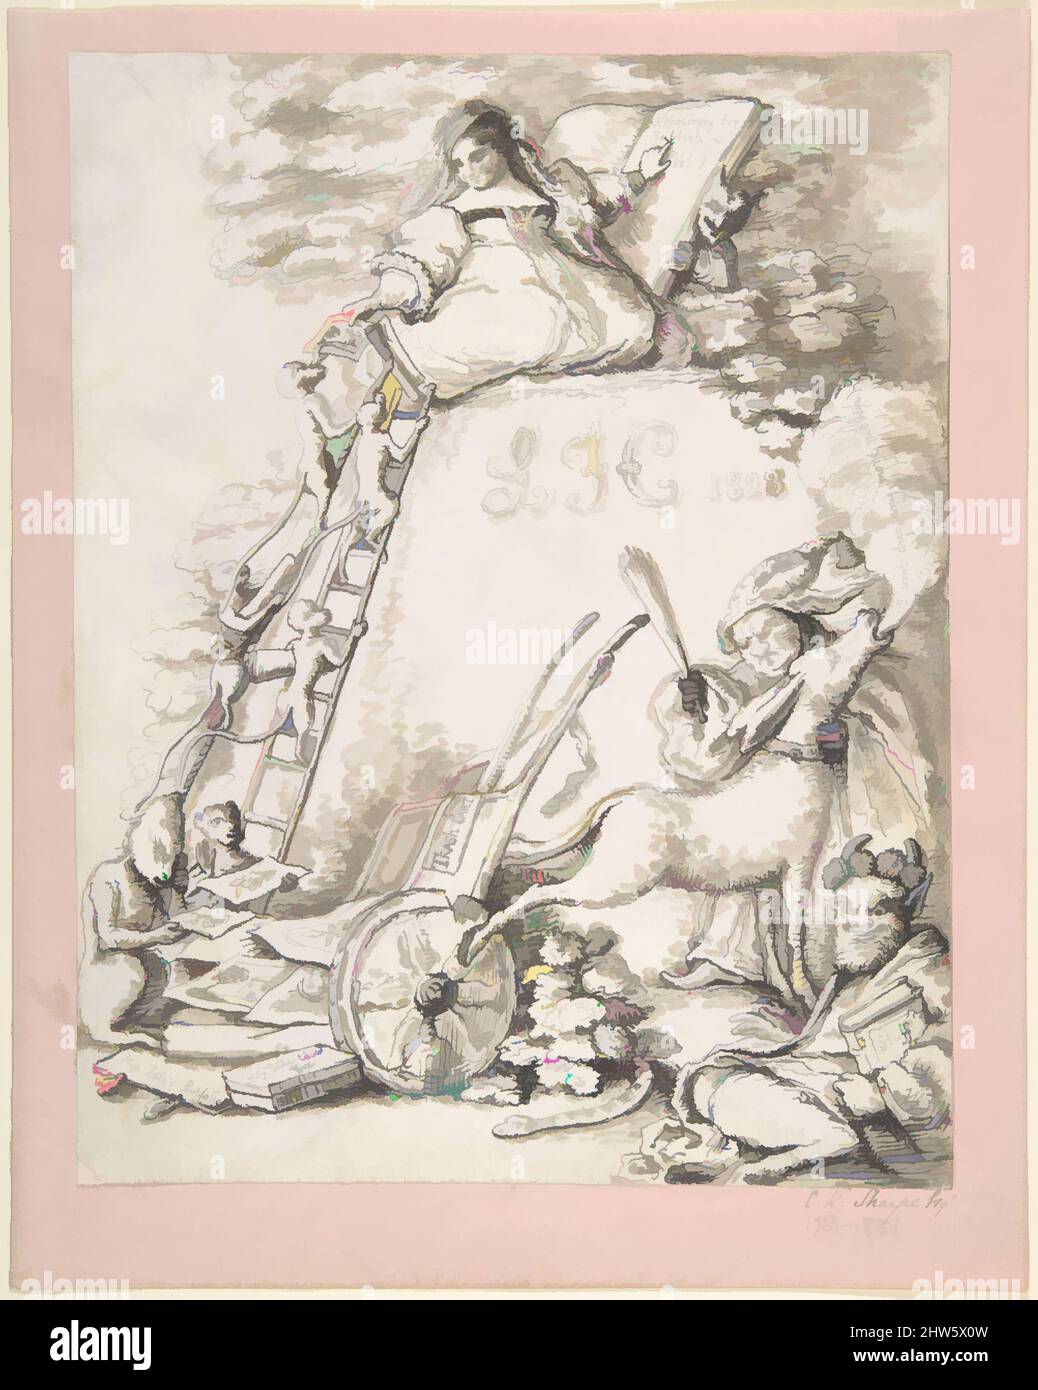 Art inspired by Repository for Rubbish, vol. I, L.F.C 1828', Illustration for children's book, 1828, Pen and ink and wash, sheet: 9 1/4 x 7 1/8 in. (23.5 x 18.1 cm), Drawings, Charles Kirkpatrick Sharpe (British, Hoddam, Scotland 1781–1851 Edinburgh, Scotland, Classic works modernized by Artotop with a splash of modernity. Shapes, color and value, eye-catching visual impact on art. Emotions through freedom of artworks in a contemporary way. A timeless message pursuing a wildly creative new direction. Artists turning to the digital medium and creating the Artotop NFT Stock Photo